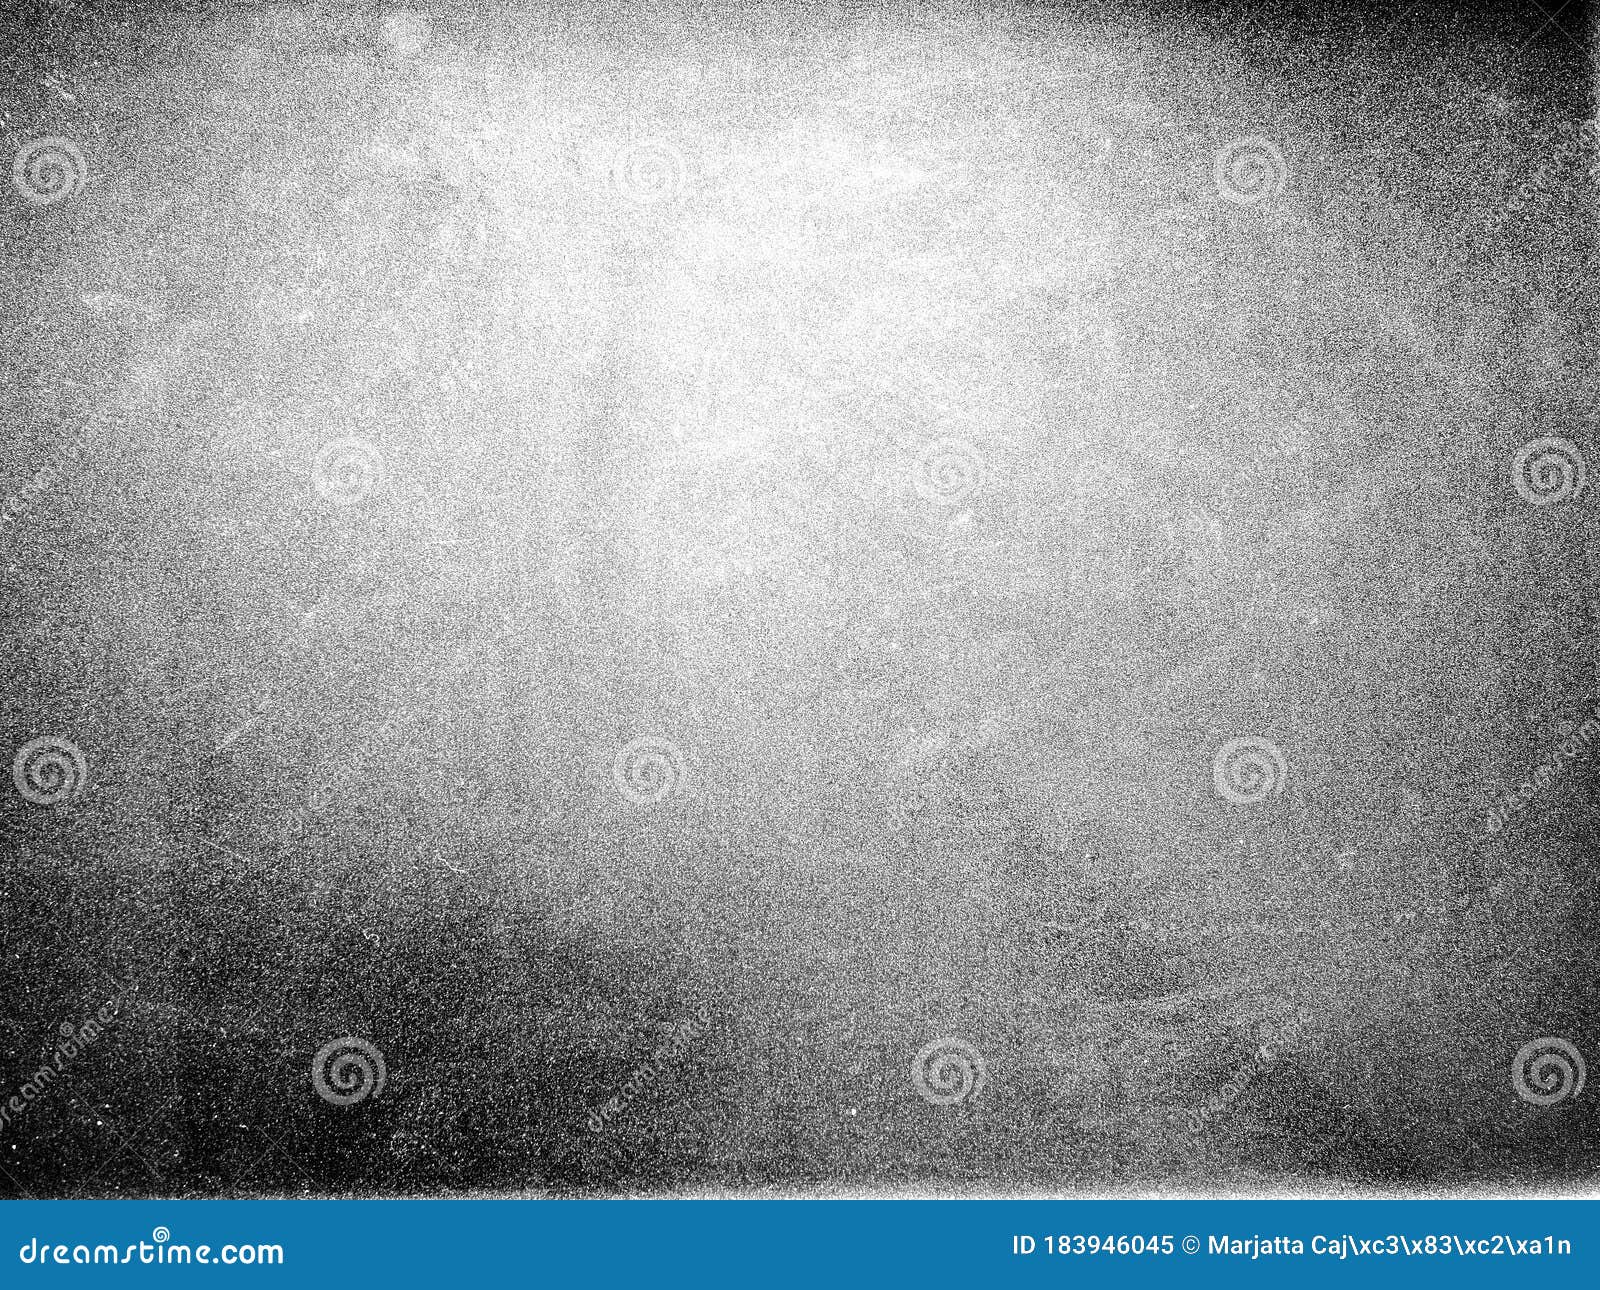 Black and White Plaster Surface Texture Stock Image - Image of light ...